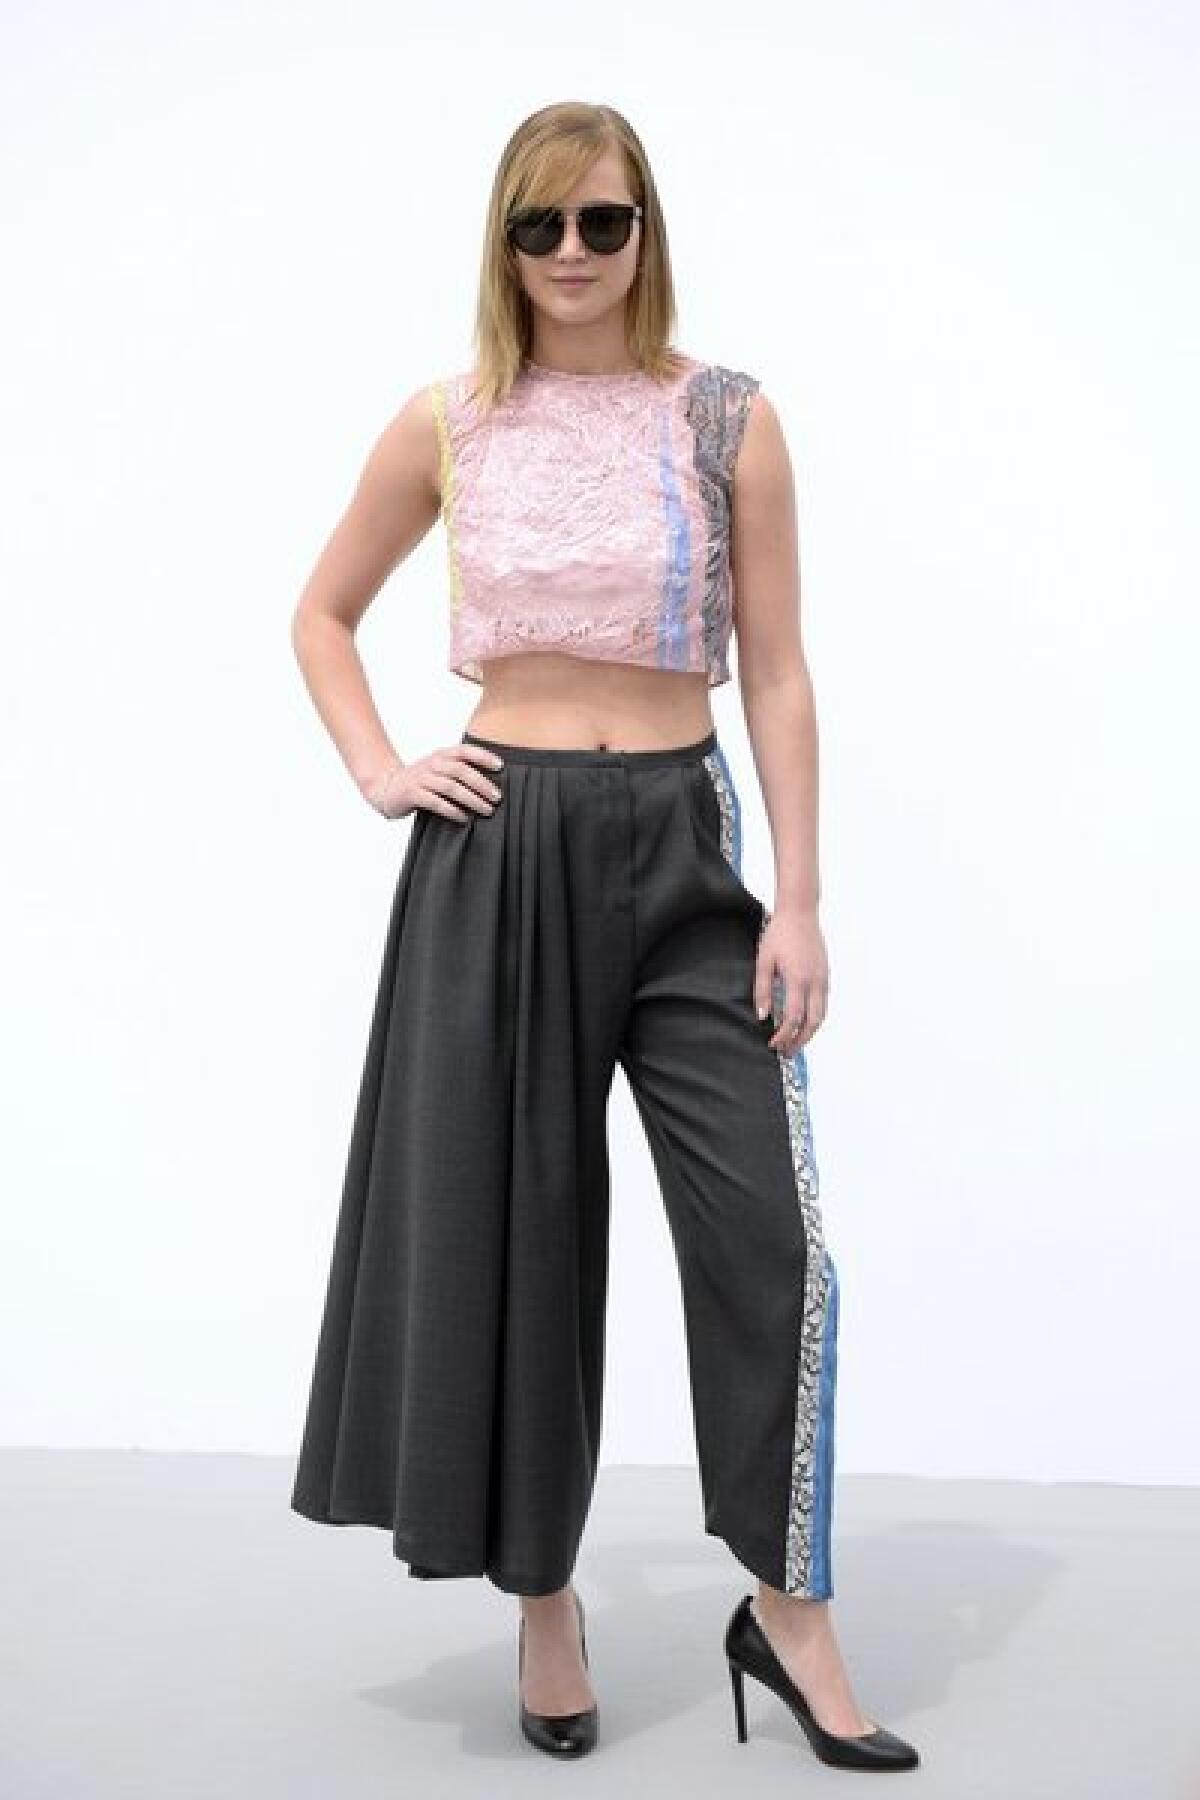 Jennifer Lawrence wears big pants to Christian Dior haute couture